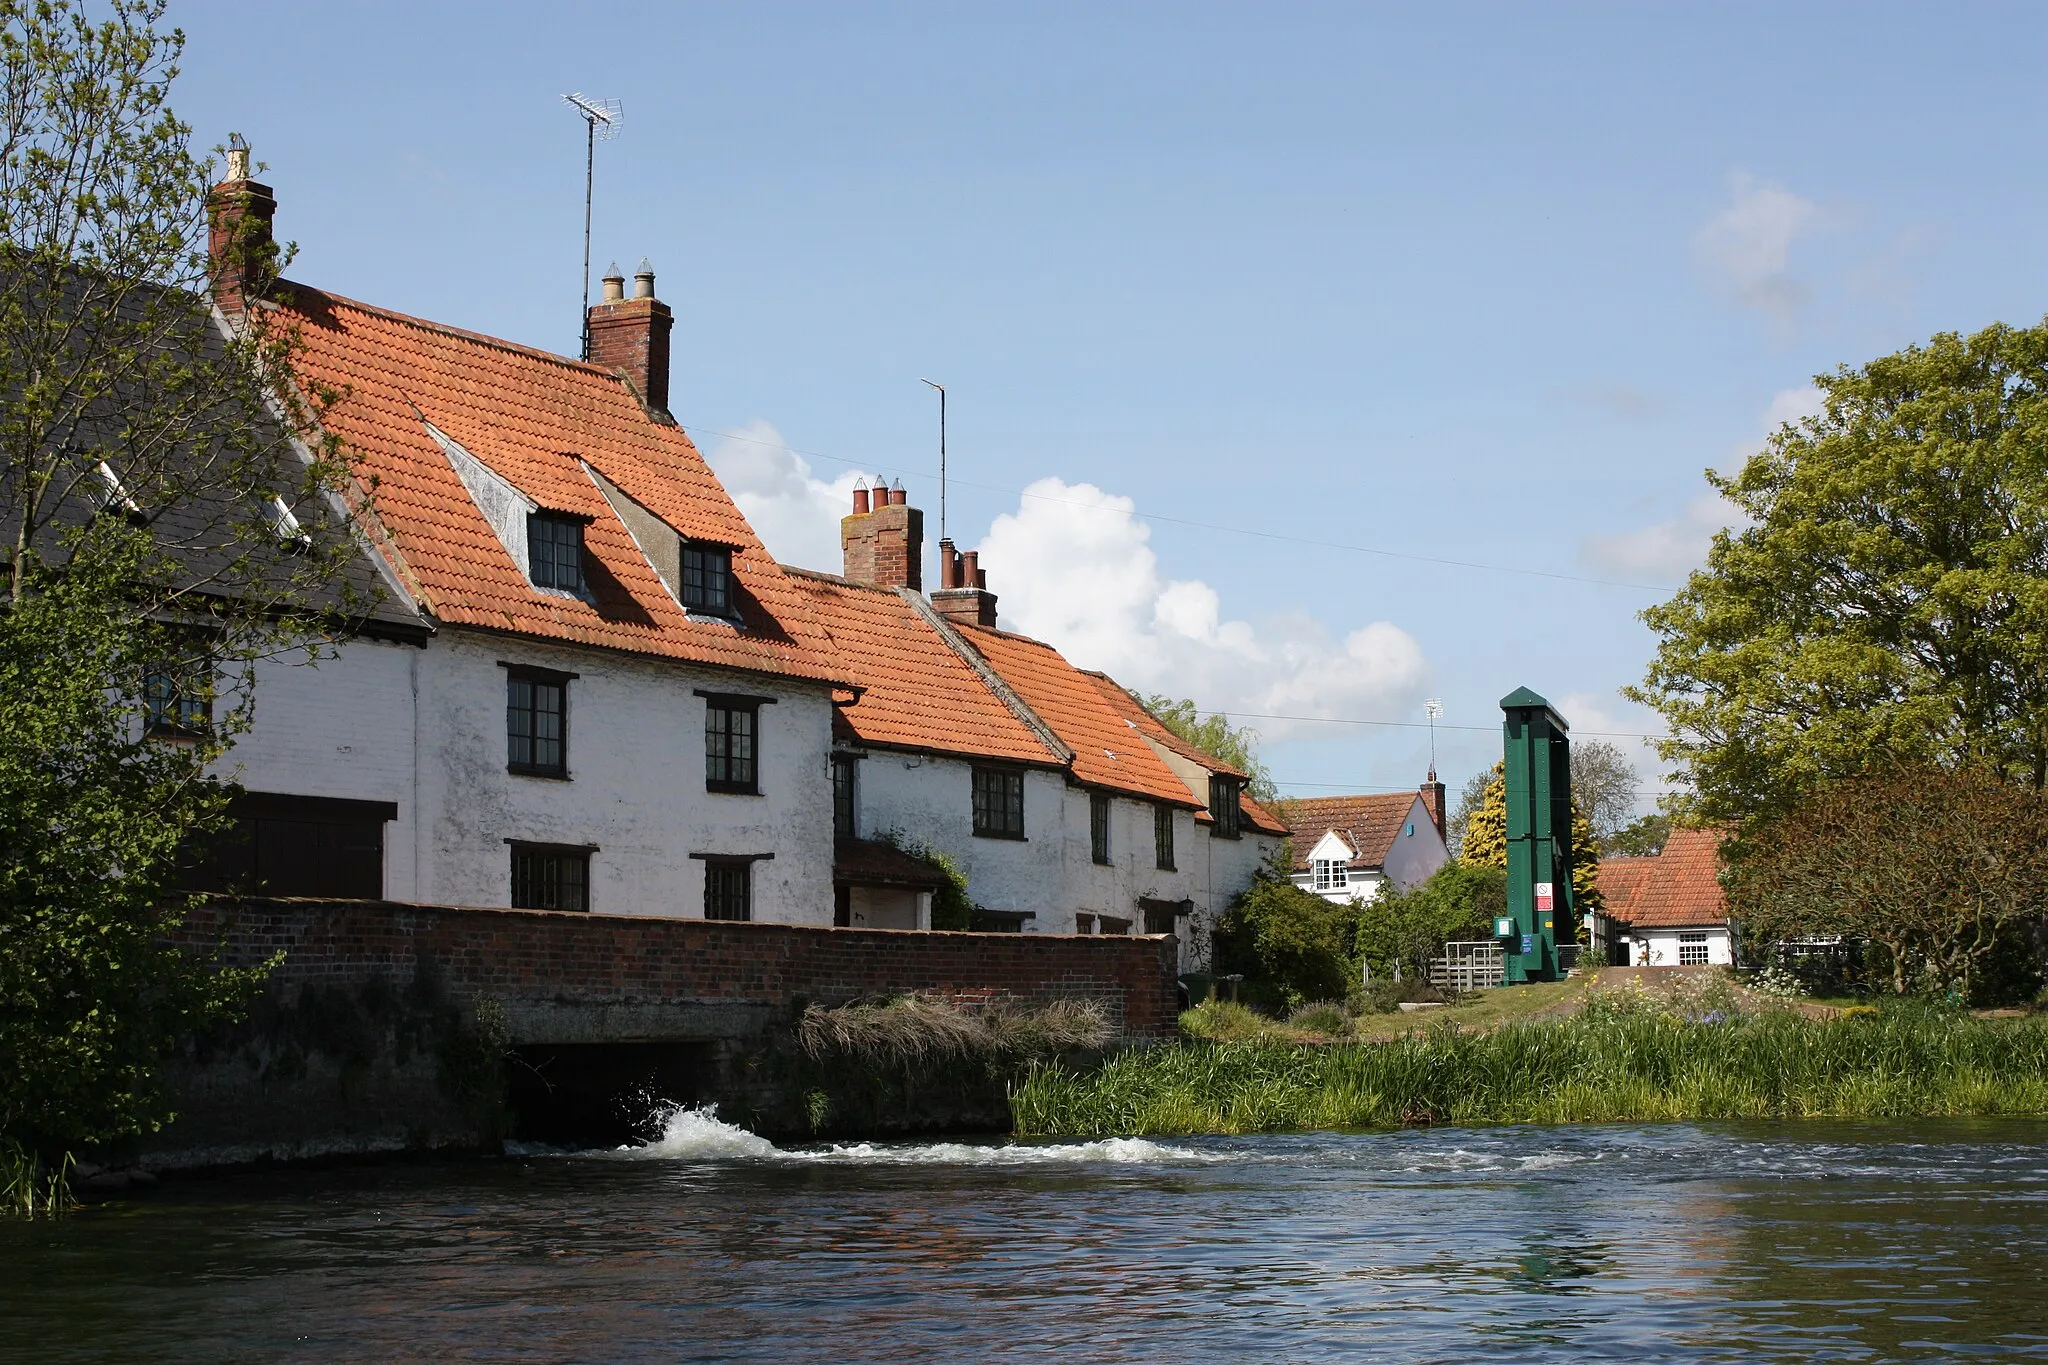 Photo showing: The Mill at Hardwater crossing, Great Doddington, Northants